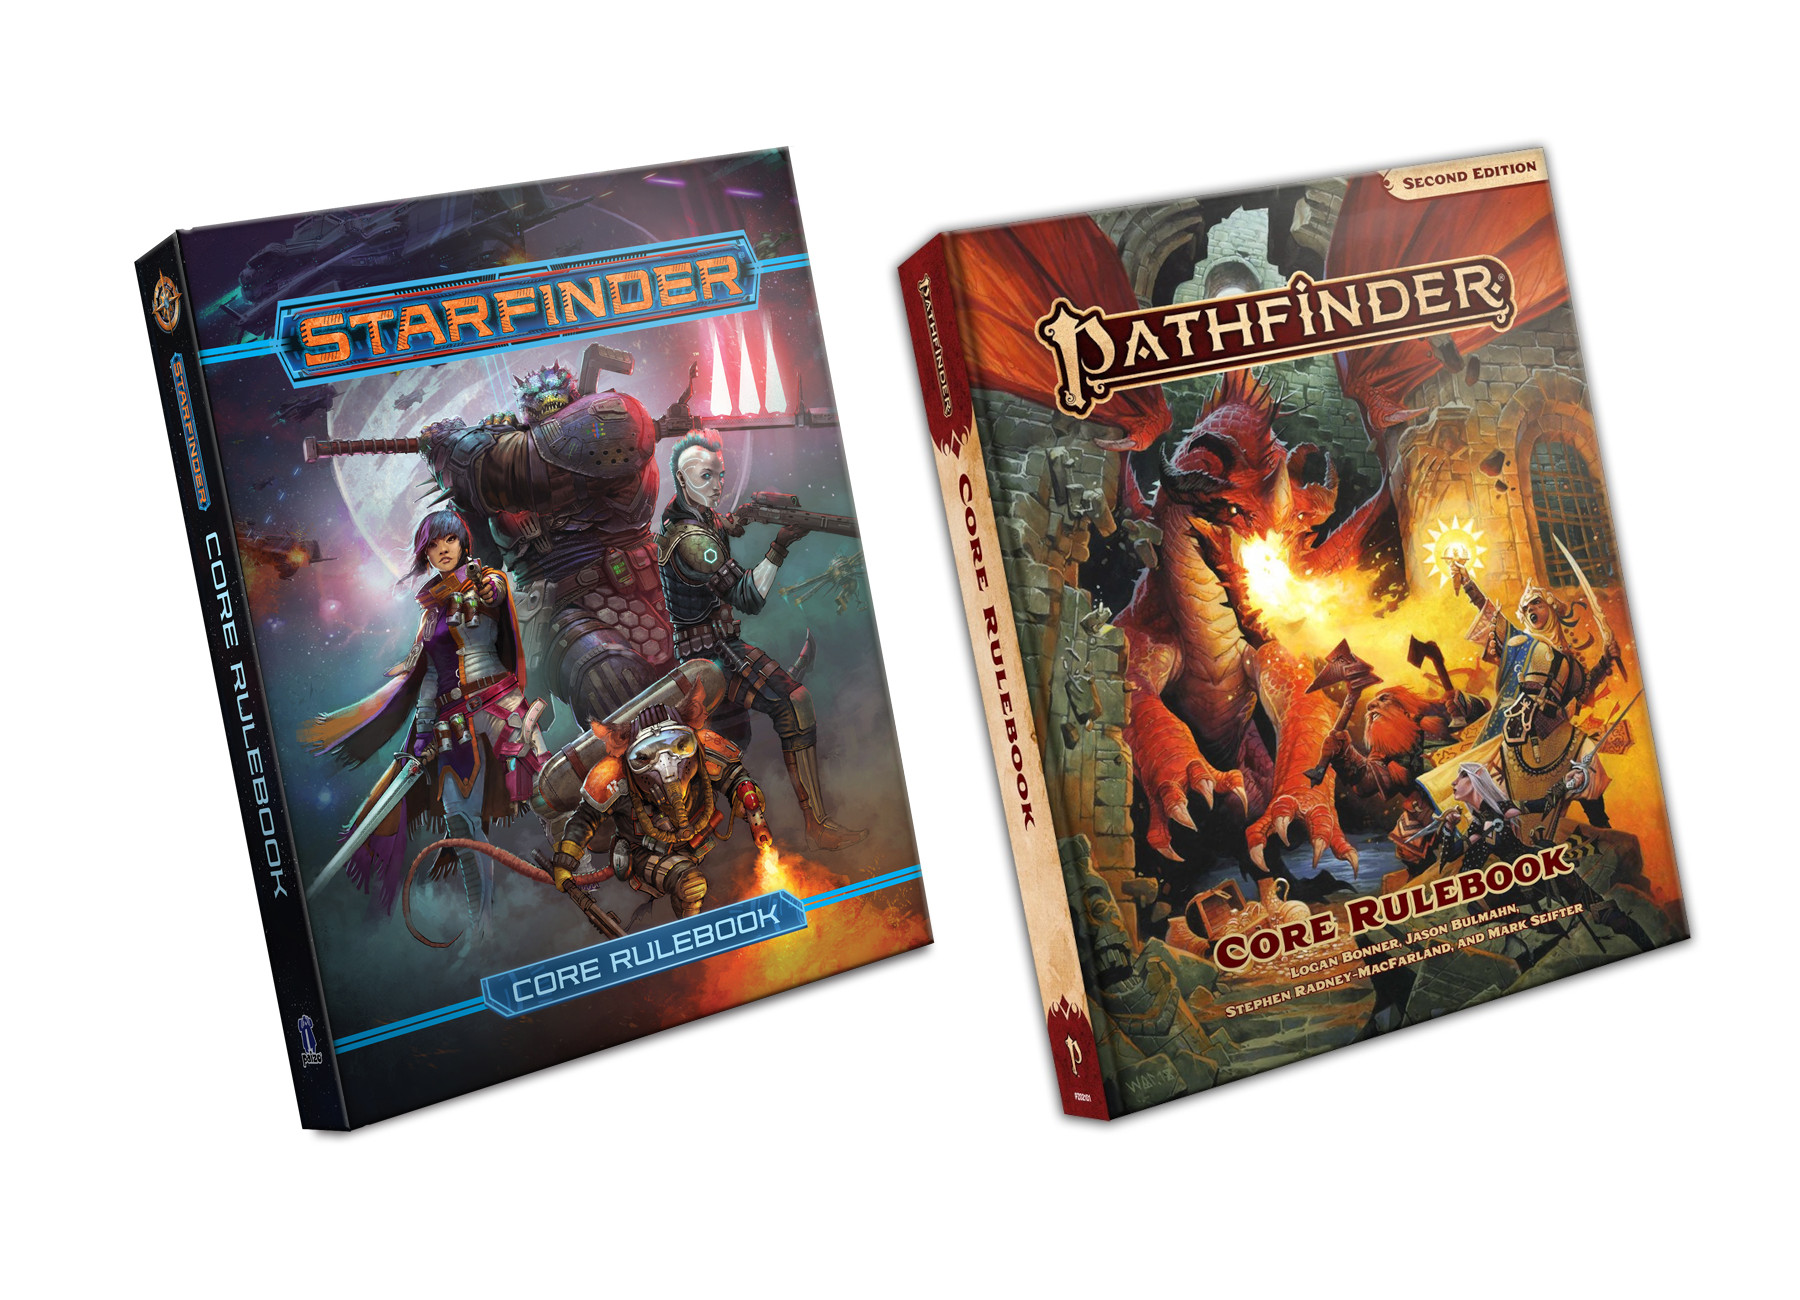 Pathfinder Second Edition Core Rulebook and Starfinder Core Rulebook Digital CD Key [USD 12.58]